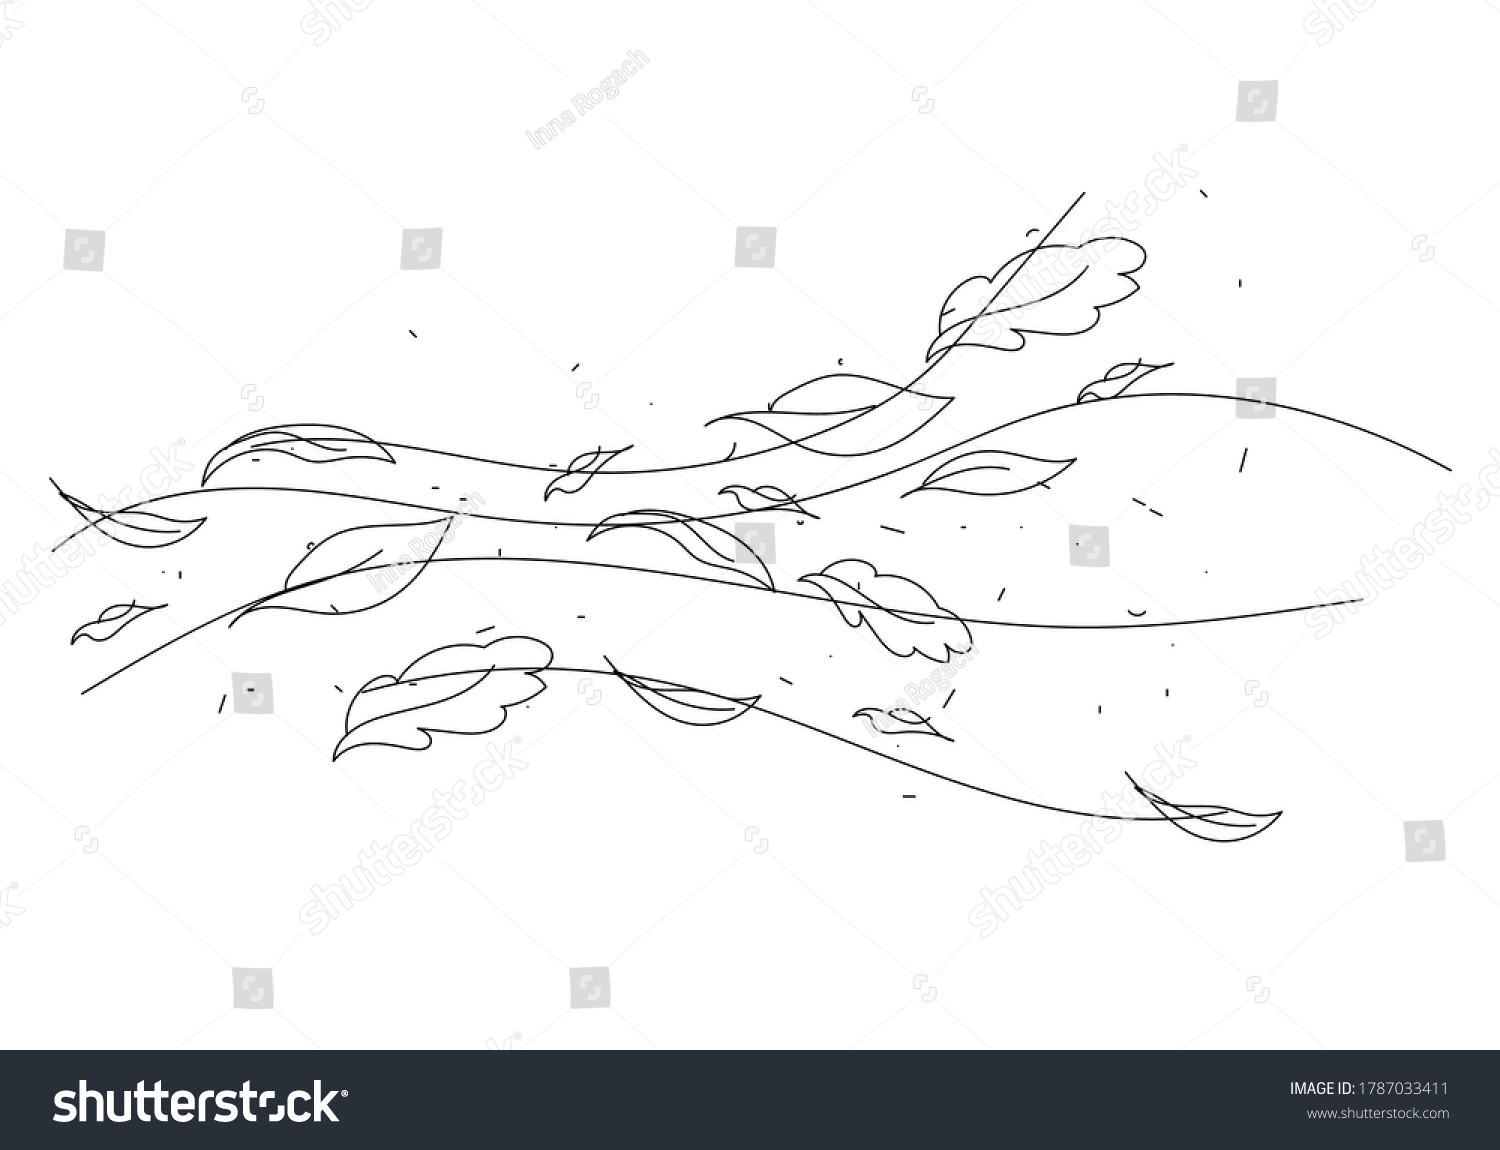 Doodle autumn weather. Line art the wind carrying fallen leaves.Fashionable modern minimalistic outline illustration.Vector illustration isolated on white.For print,postcards,posters,book picture #1787033411